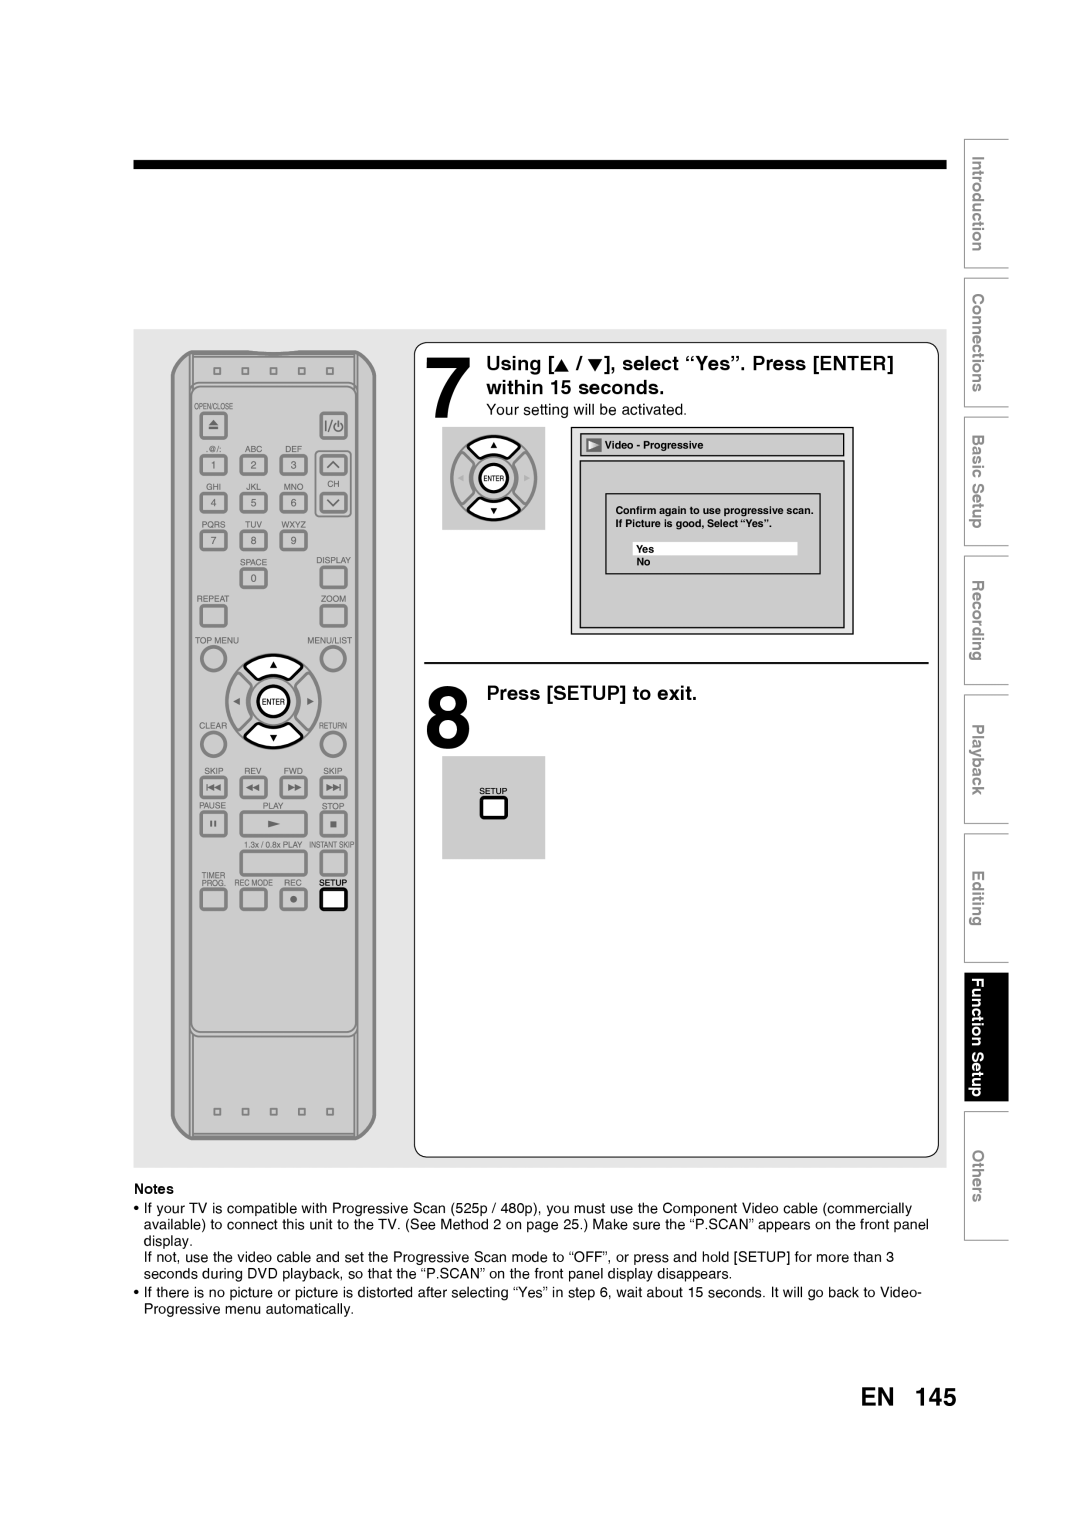 Toshiba D-RW2SU/D-RW2SC manual Using K / L, select “Yes”. Press ENTER within 15 seconds, Press SETUP to exit 